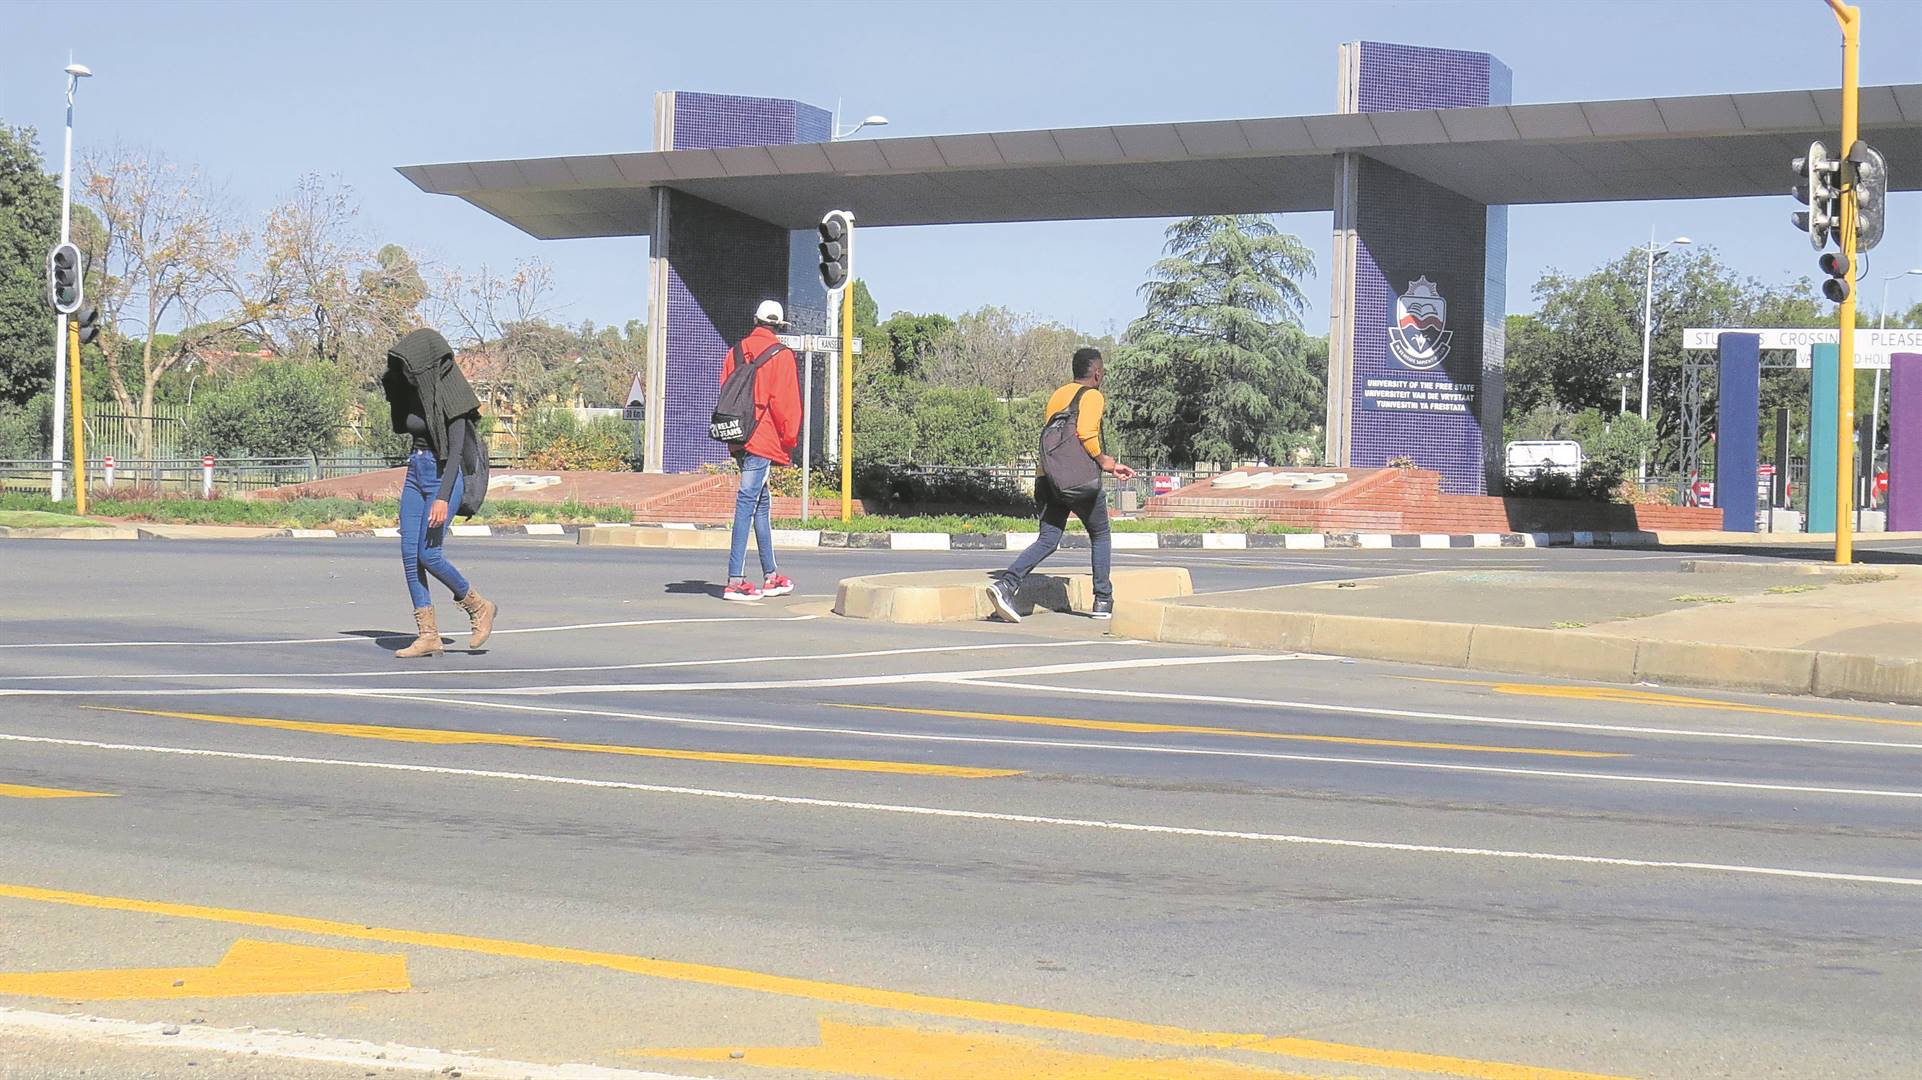 Students of the University of the Free State (UFS) at the pedestrian crossing on Nelson Mandela Drive.